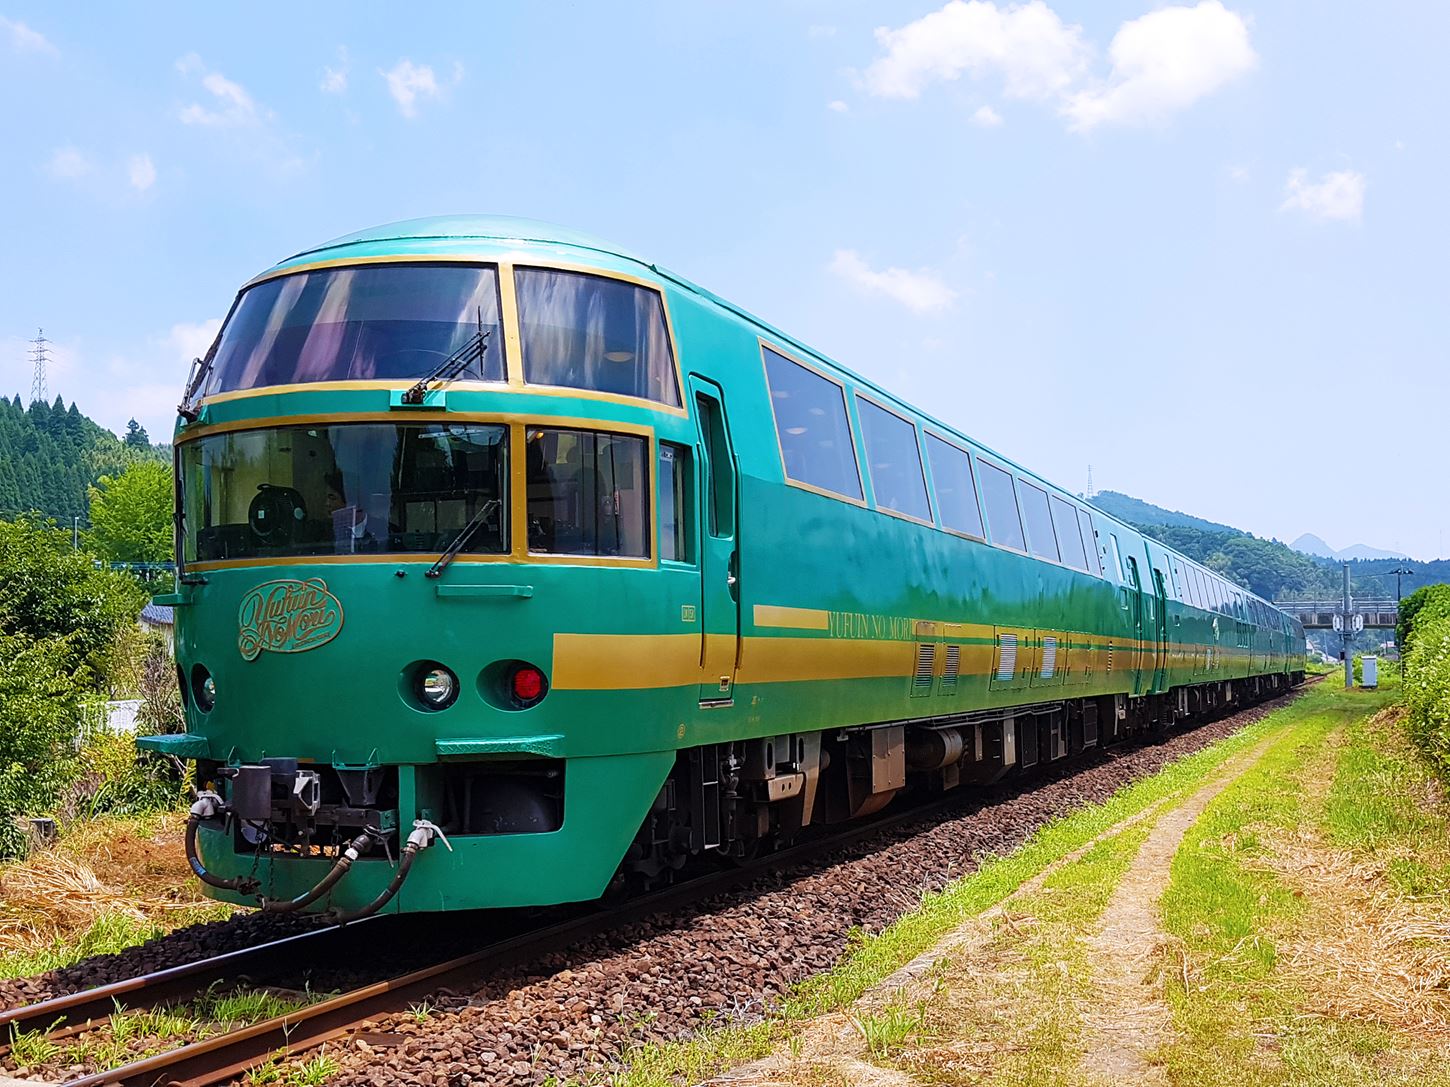 The vintage green romance train named "Yufuin no Mori" running pass the green meadow to Yufuin Station = Shutterstock